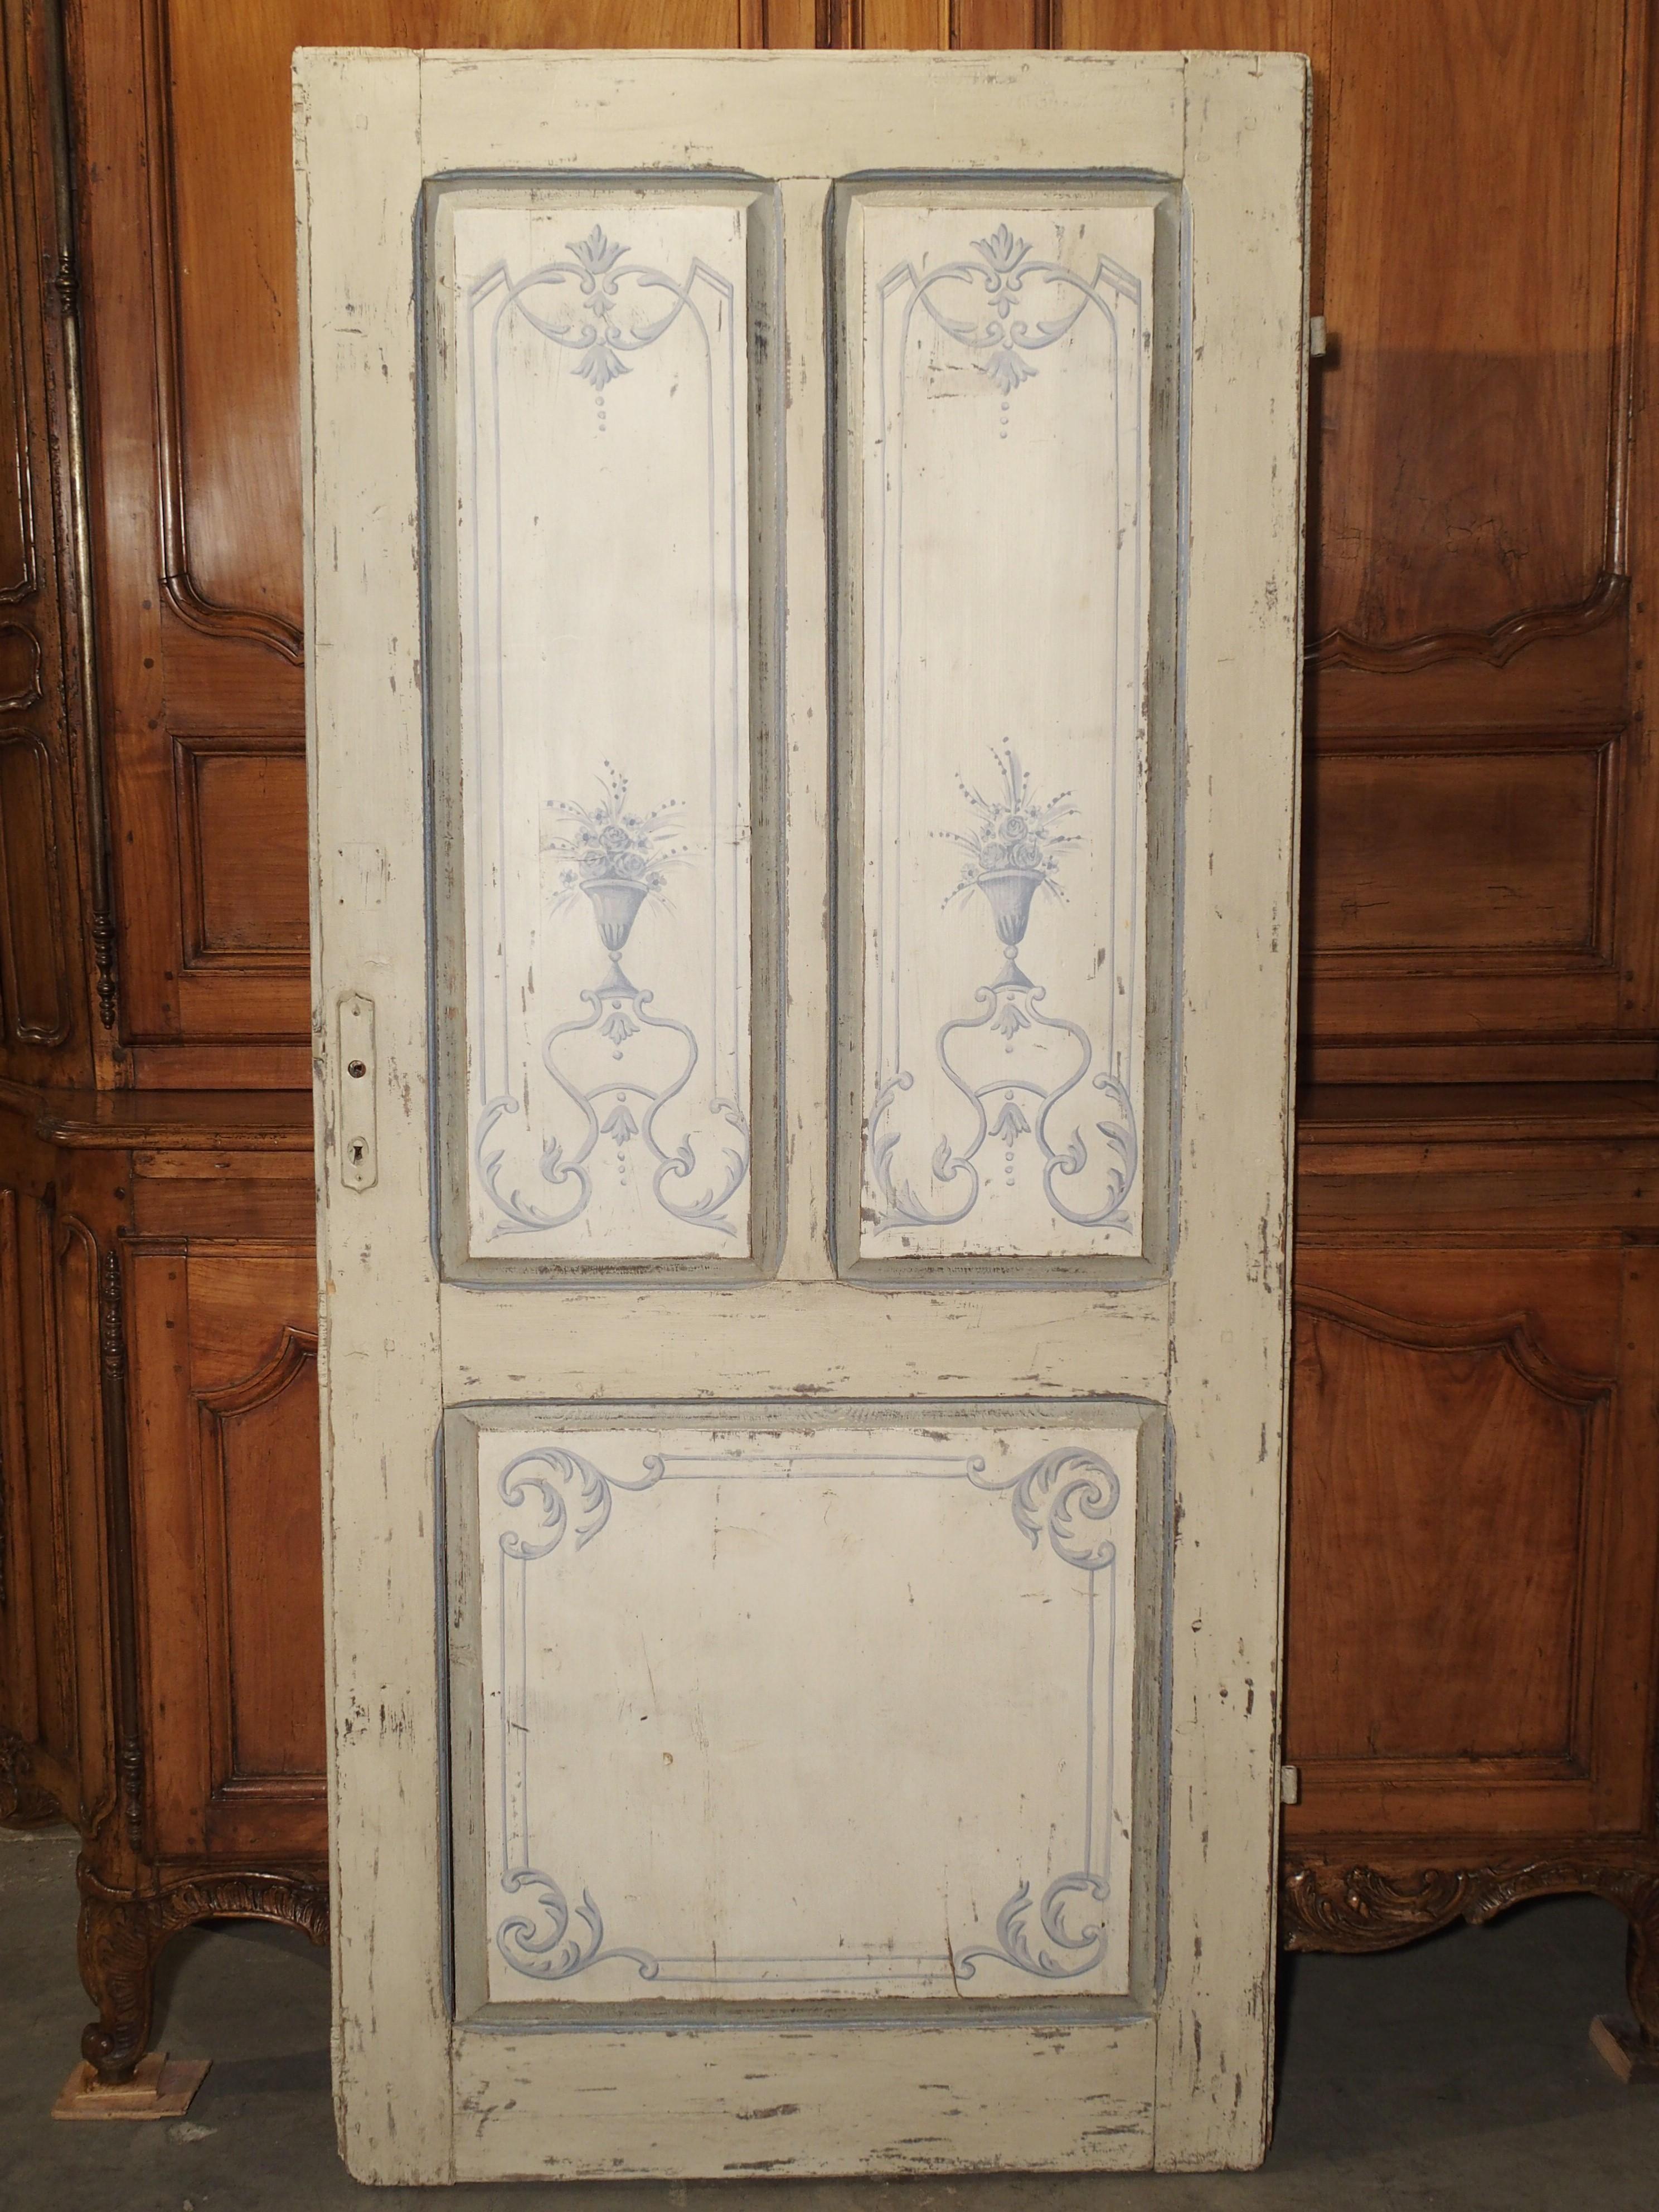 Neoclassical Blue and White Painted Antique Door from Lombardy, Italy circa 1850